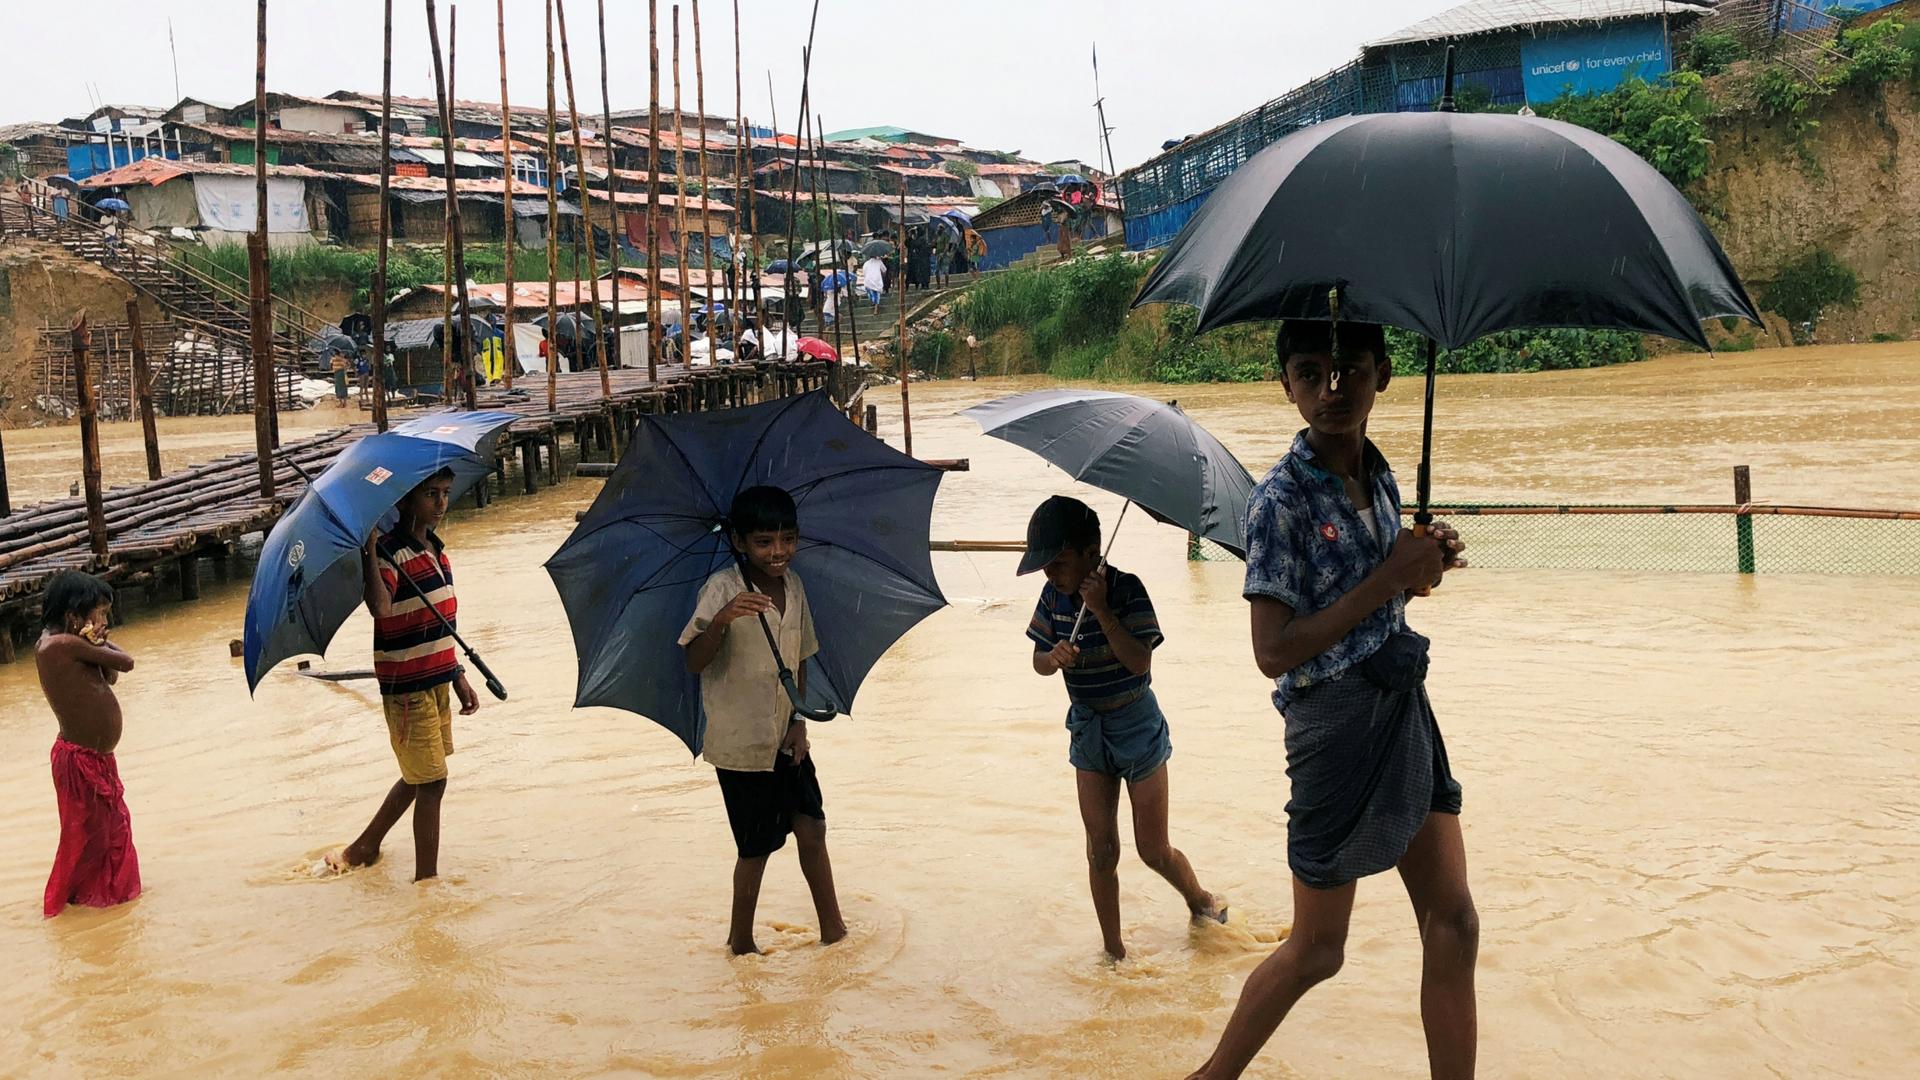 Young people walk through flood waters at refugee camp